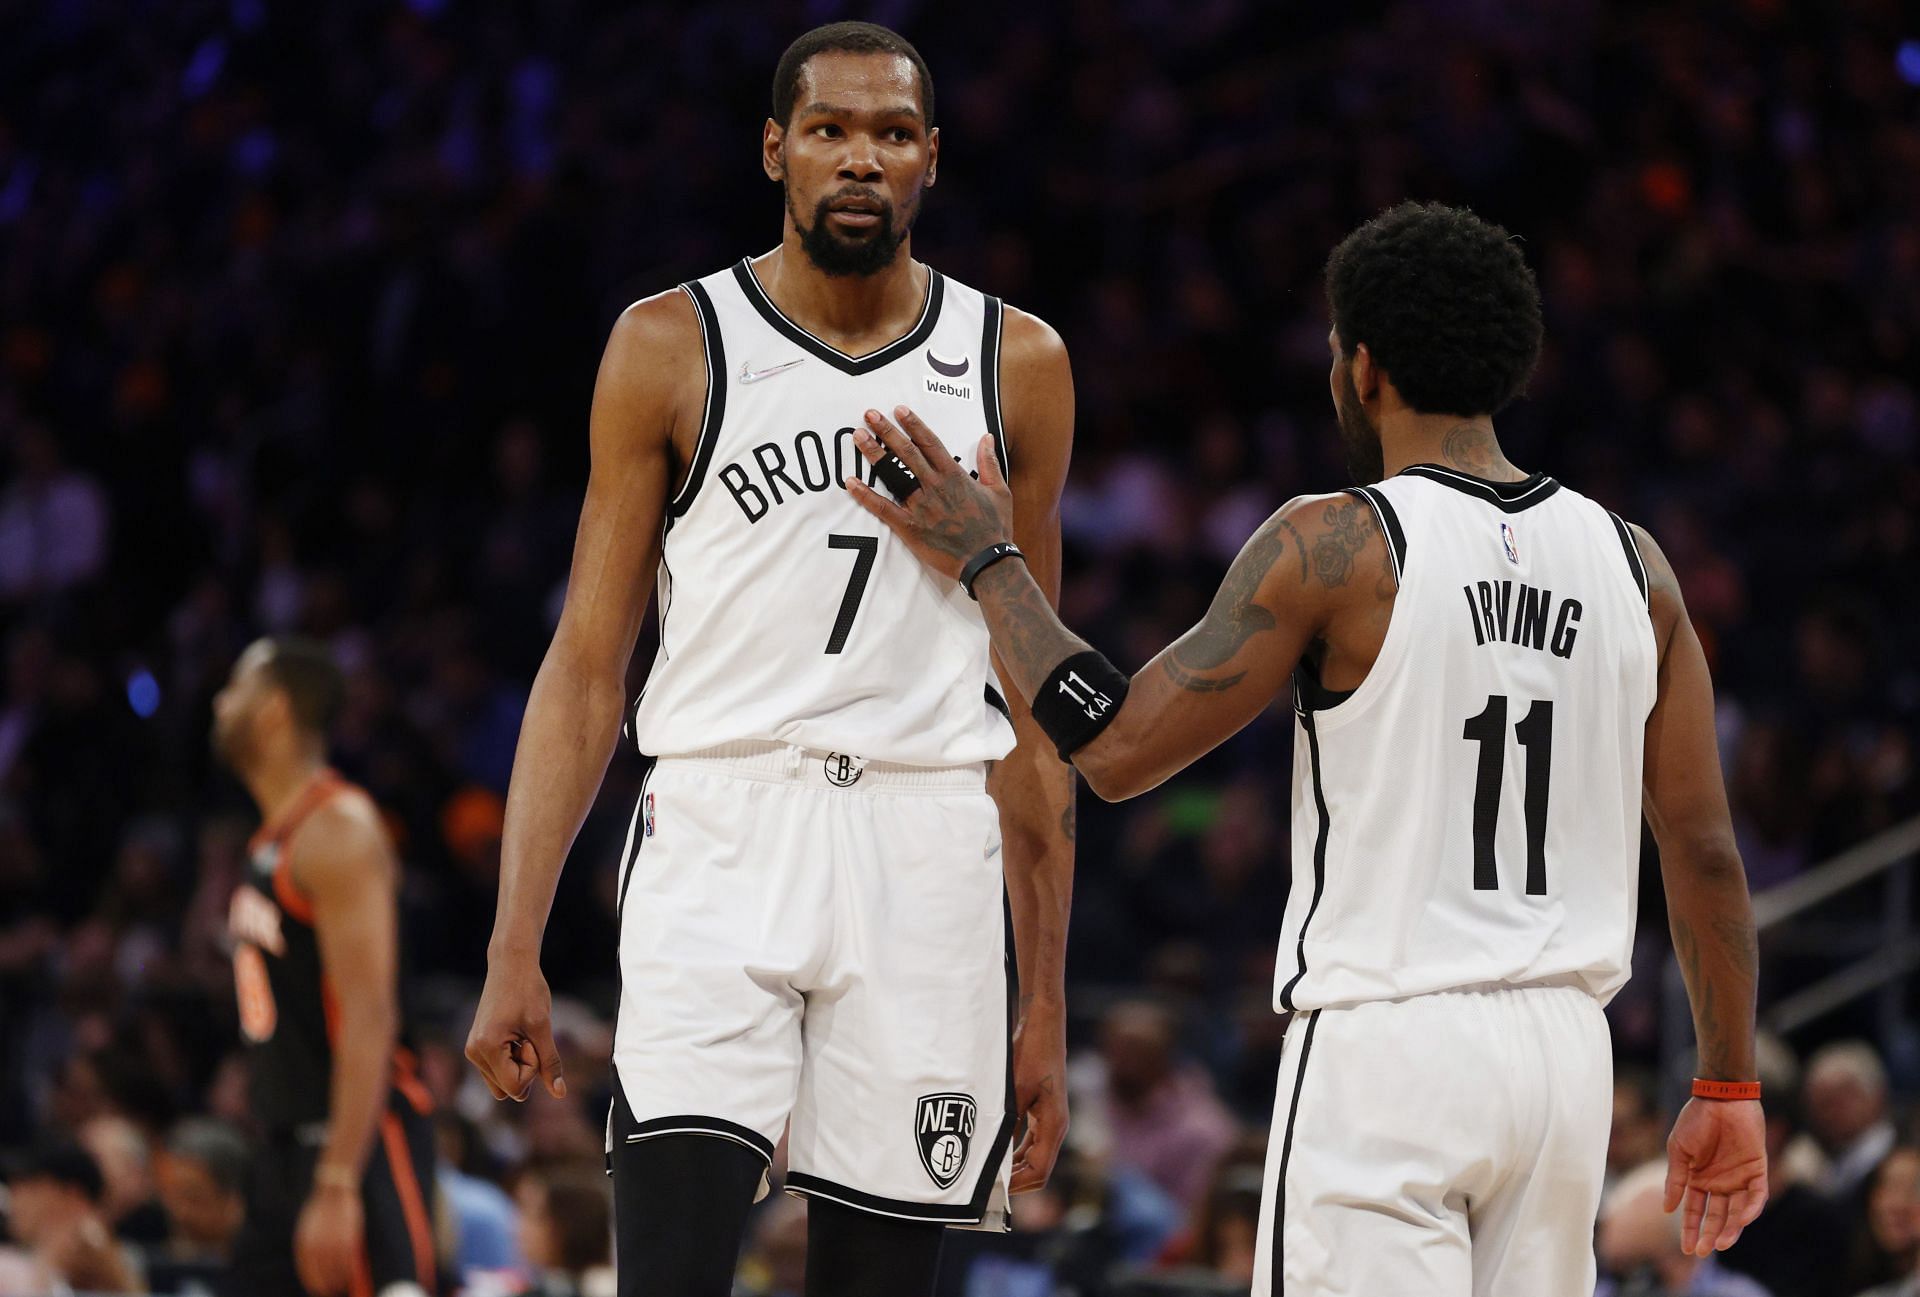 Brooklyn Nets stars Kevin Durant and Kyrie Irving